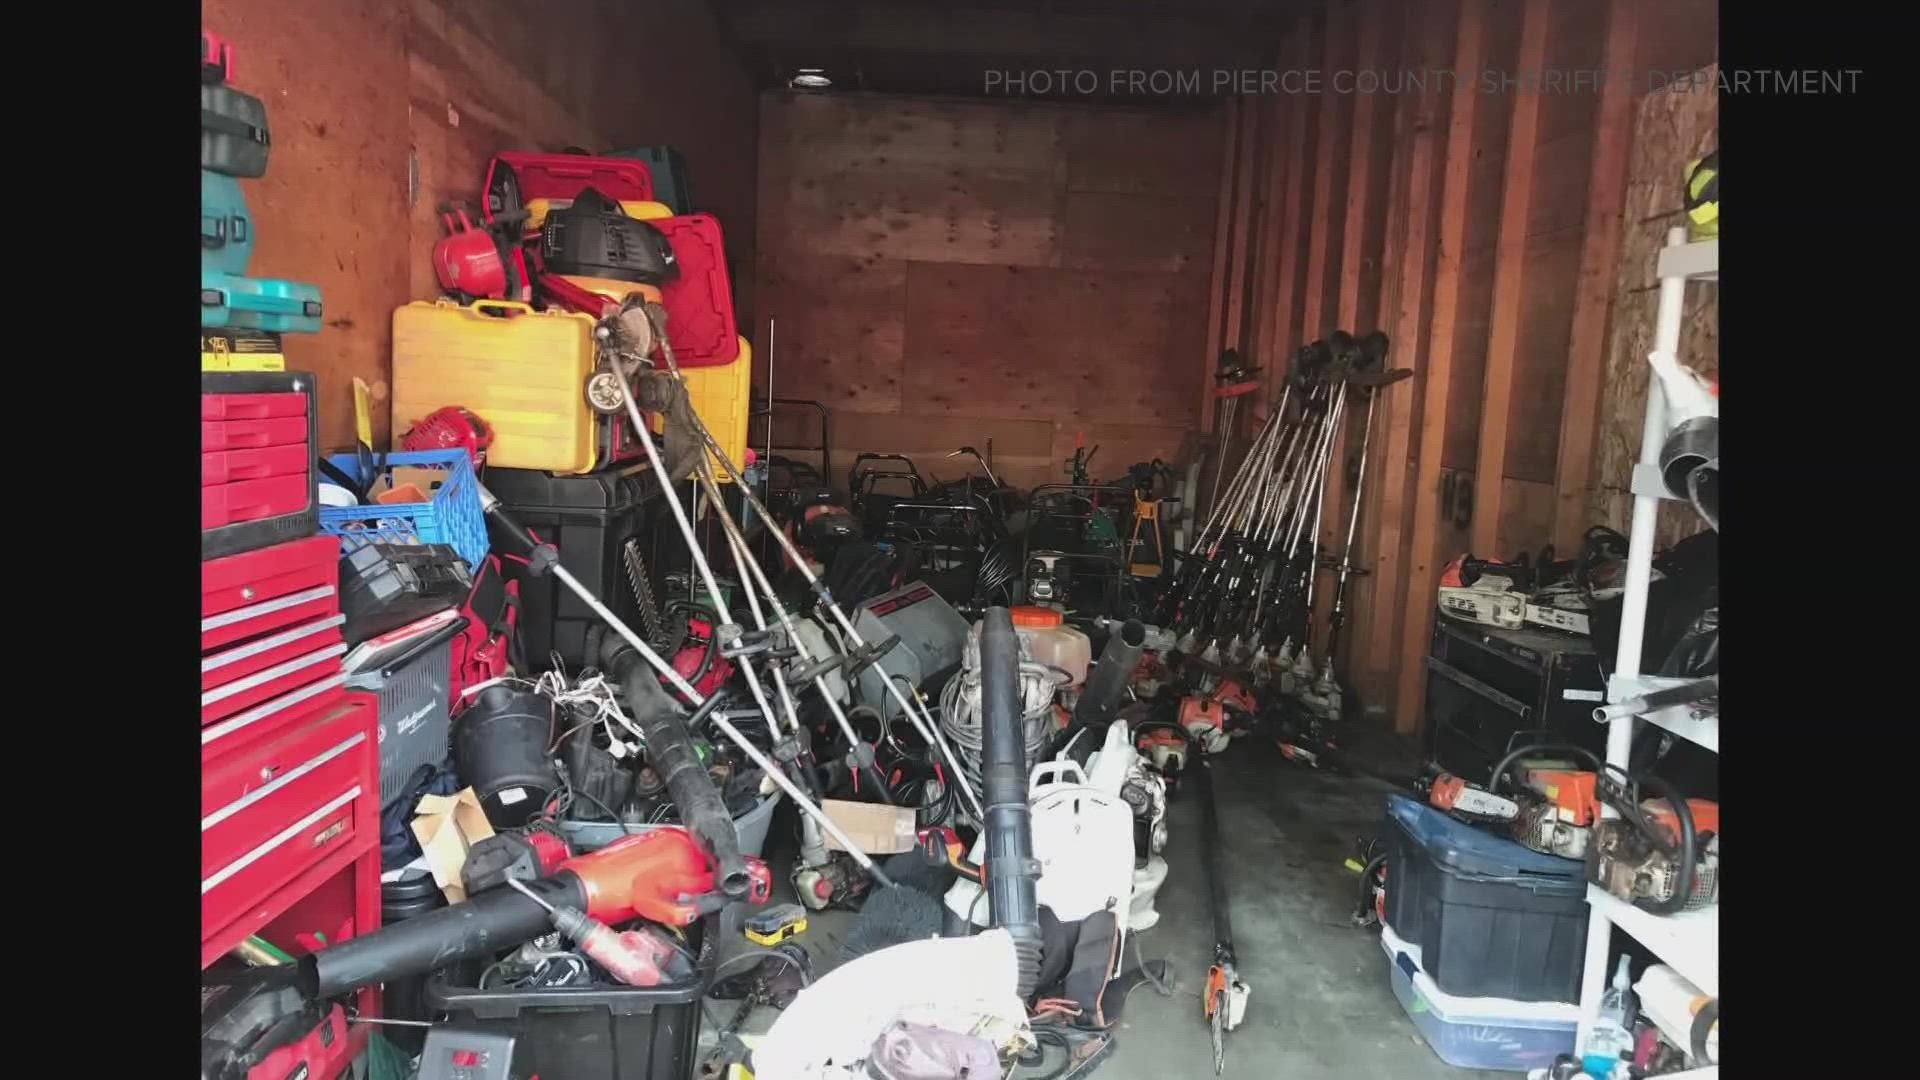 Deputies recovered $100,000 worth of landscaping equipment from a storage unit linked to a man who hit and killed a 12-year-old with a stolen truck in January.